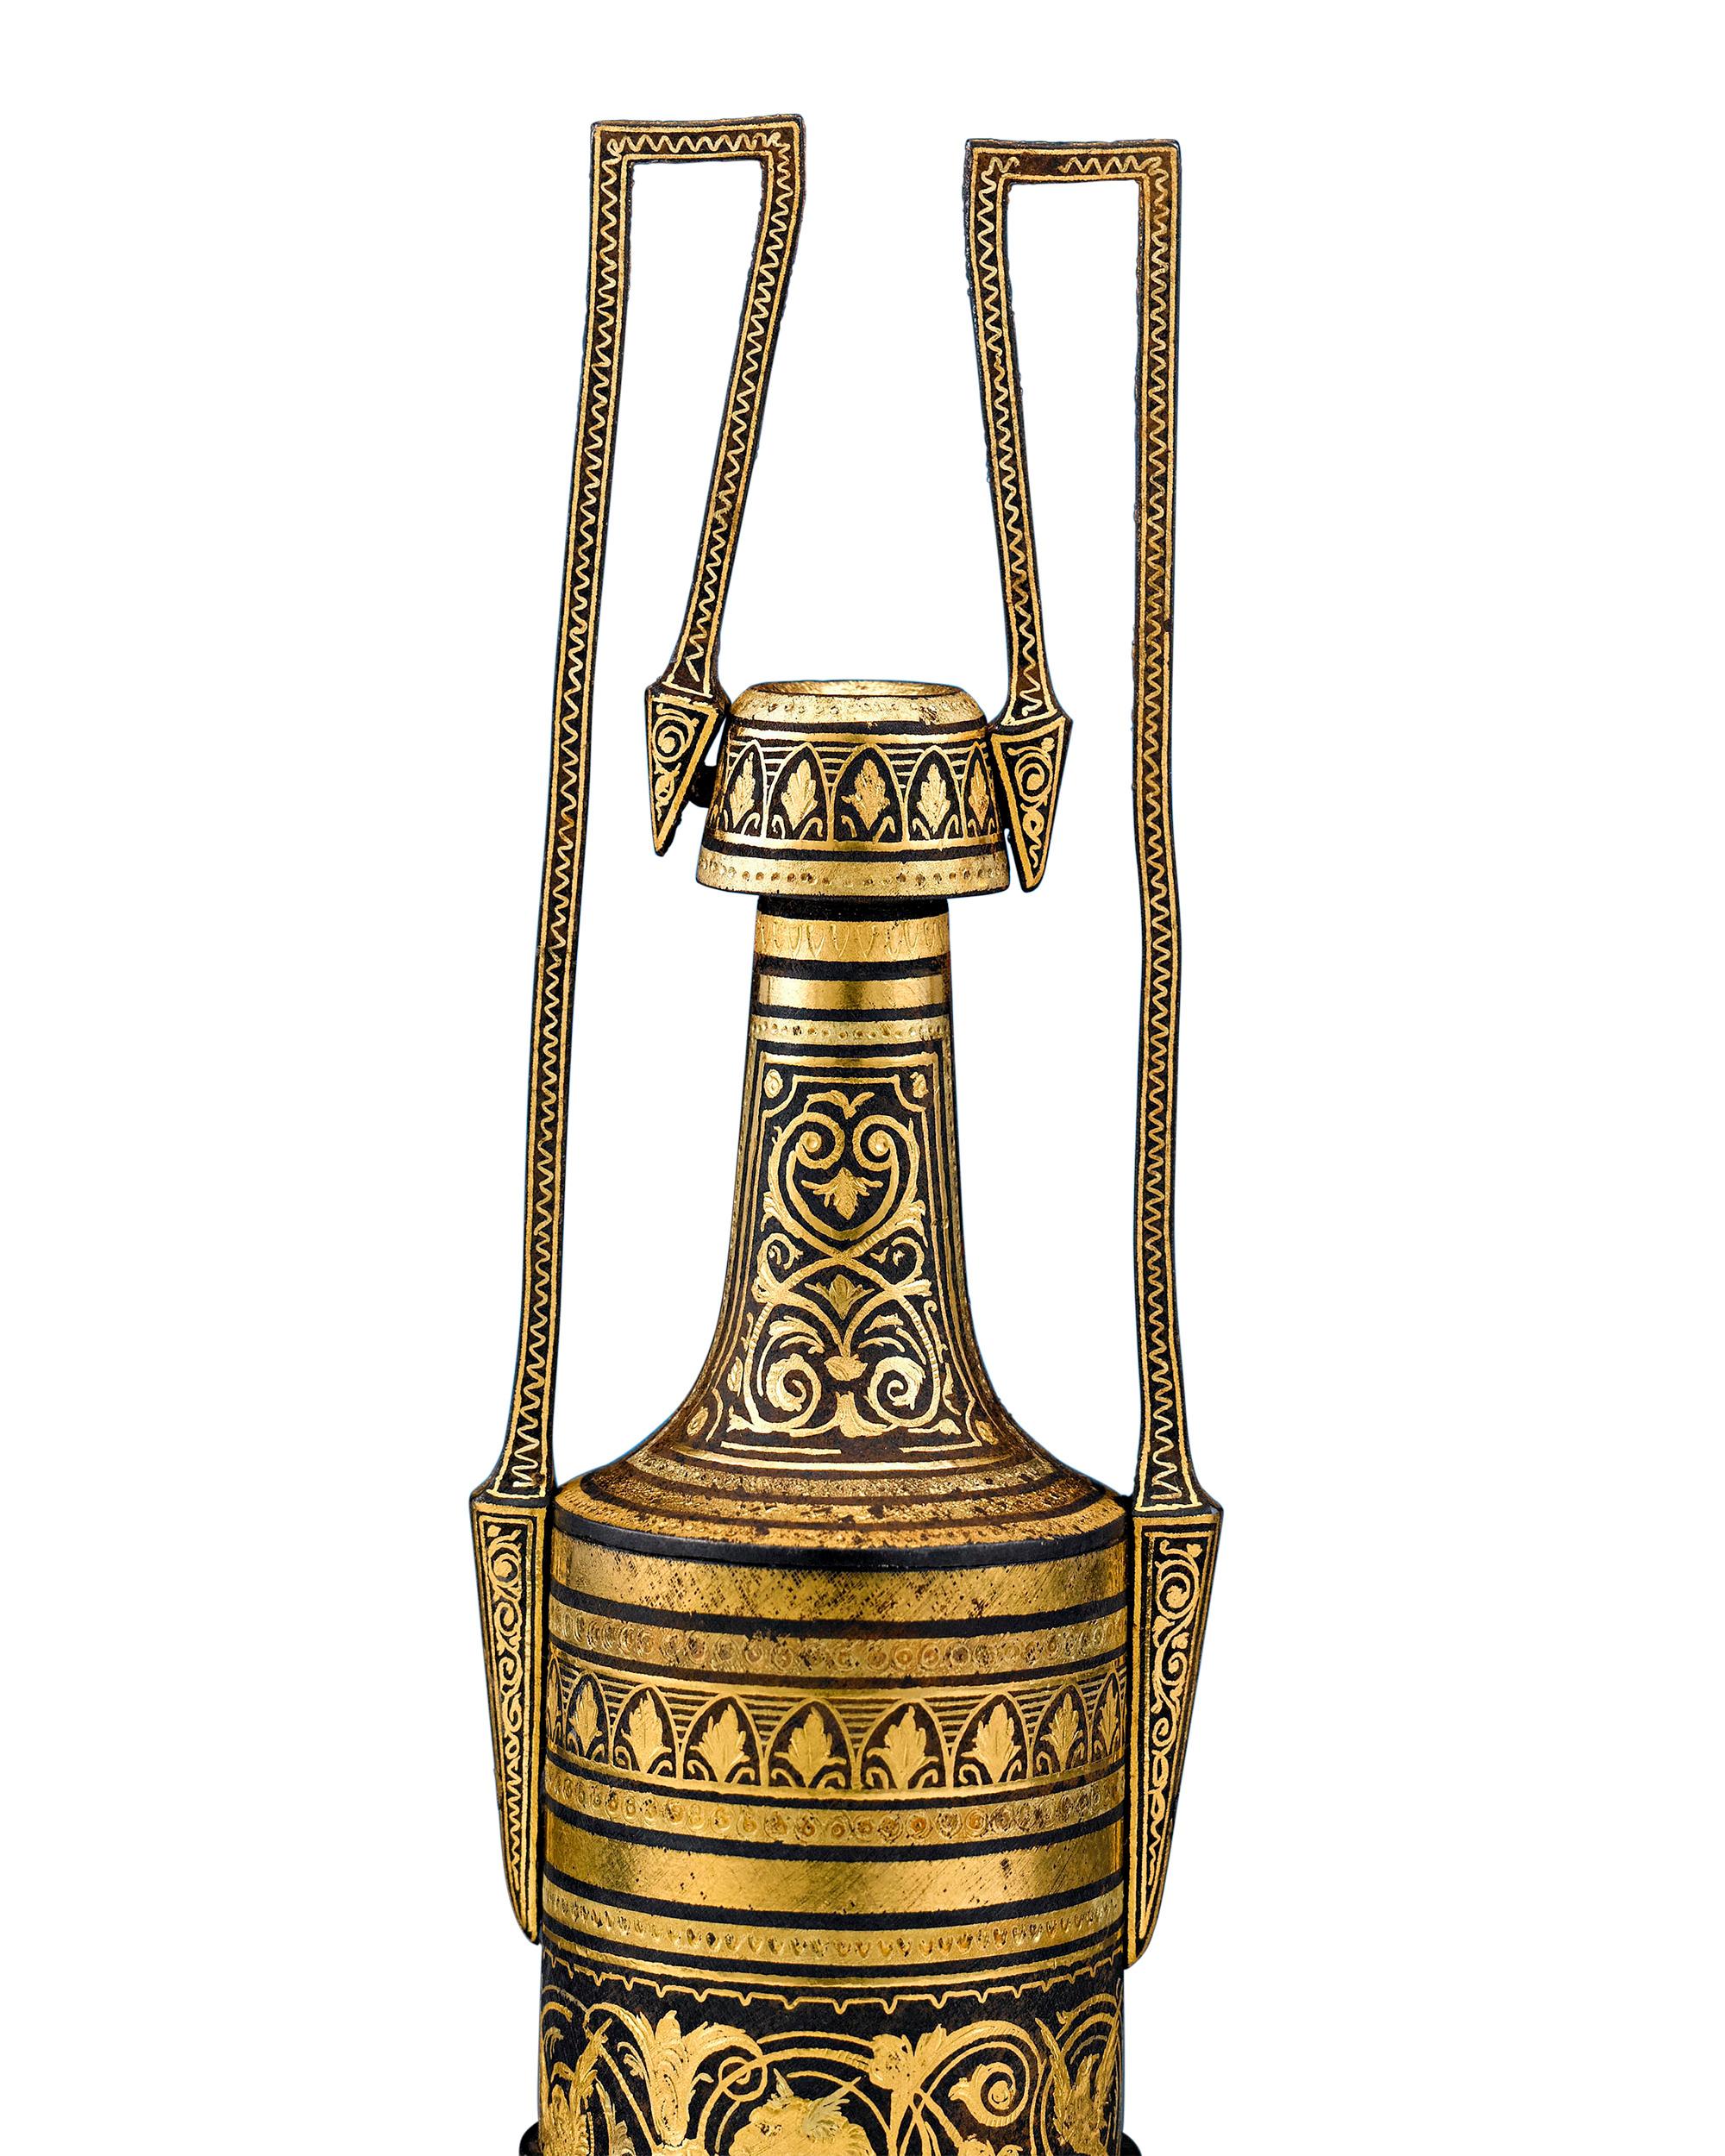 This beautiful damascene urn is a wonderful example of Toledo metalwork. The incredibly fine oxidized steel with gold inlay is congruent with the organic motifs used by craftsmen in the Zamboanga Peninsula of the Philippines. The Spanish first